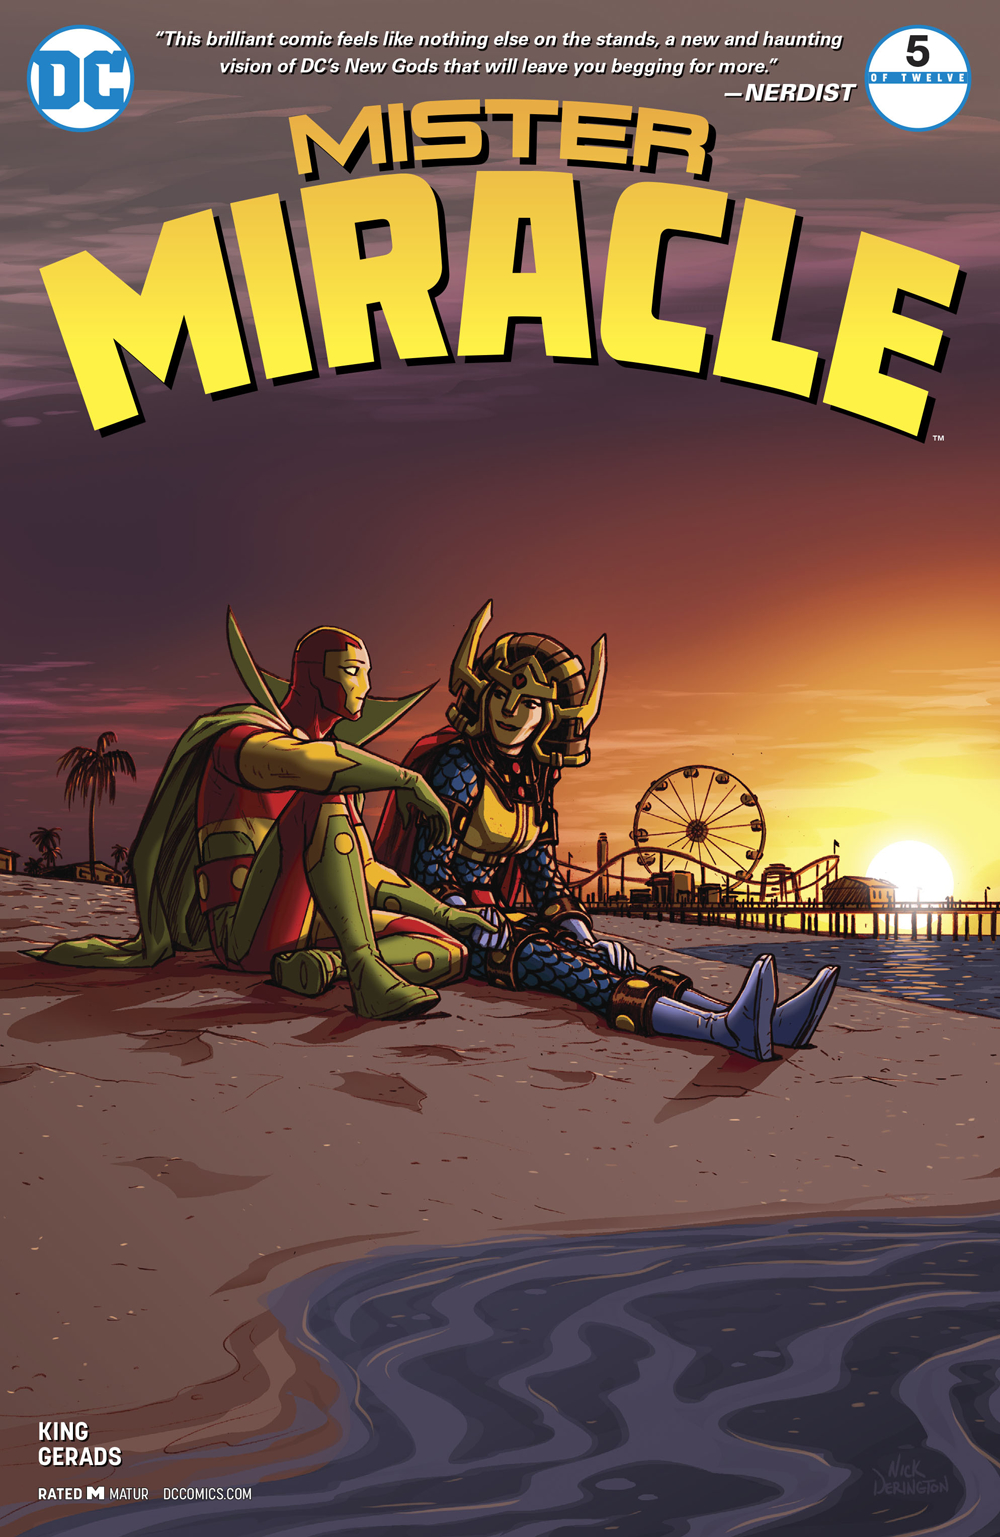 MISTER MIRACLE #5 (OF 12) (MR)